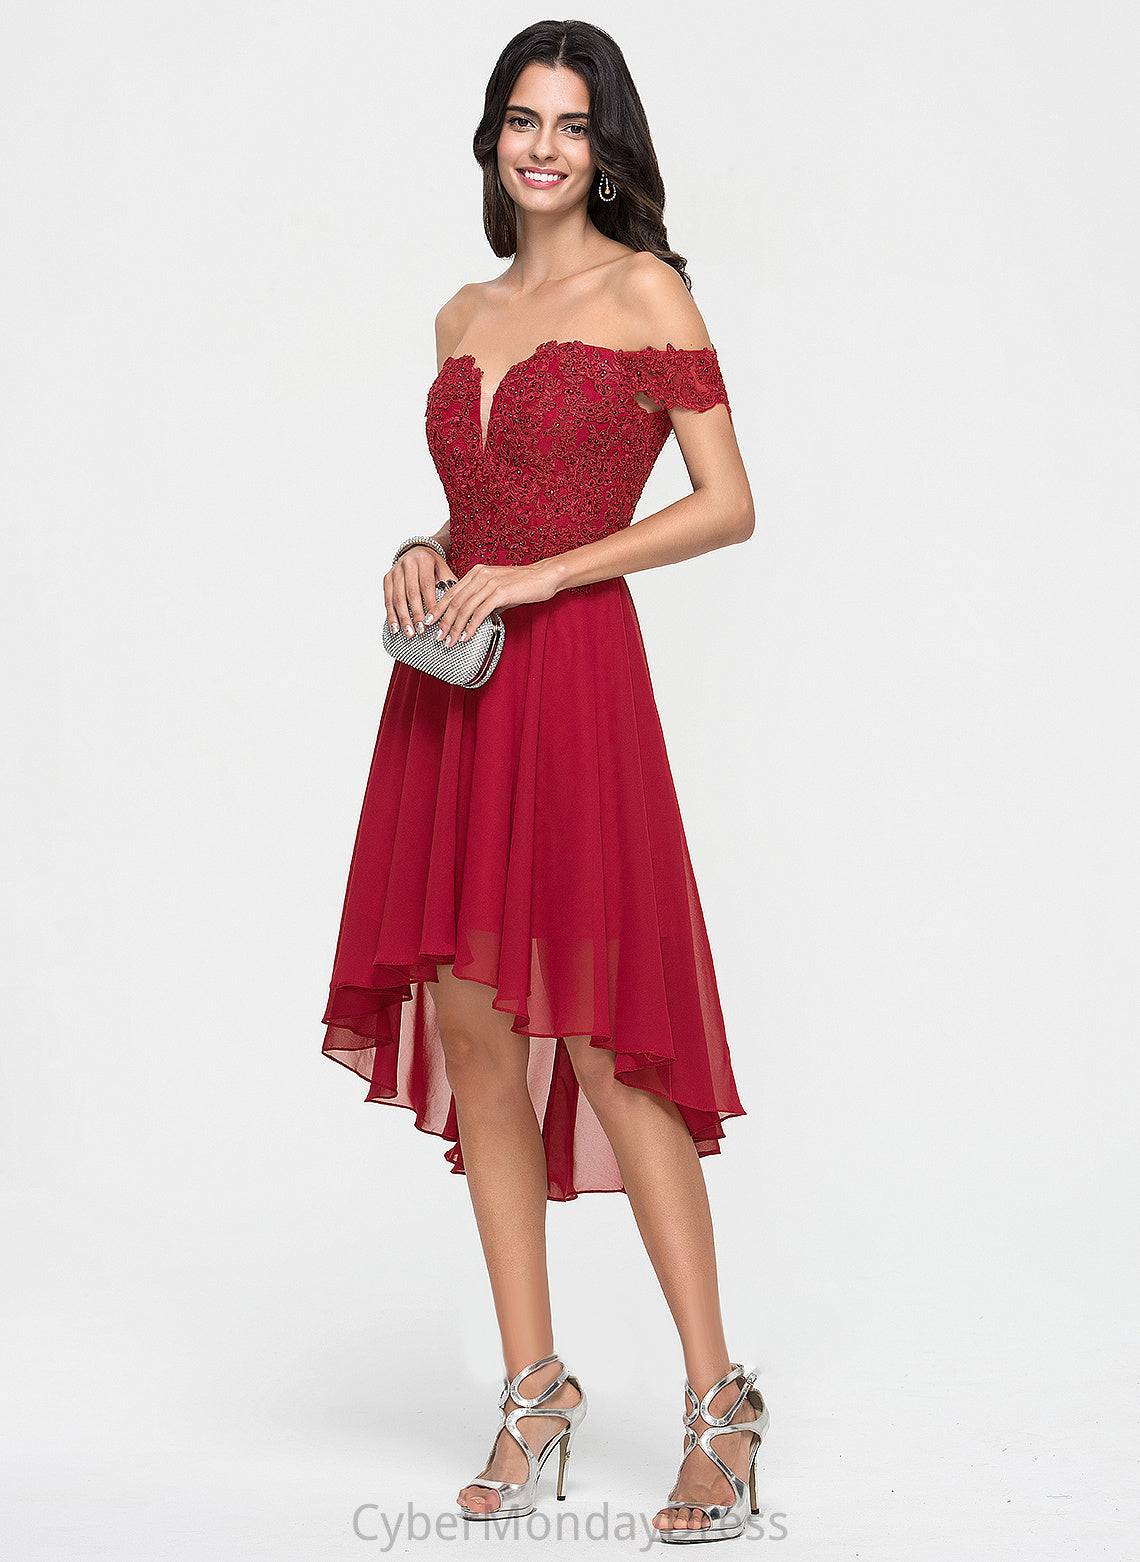 Cocktail Asymmetrical Lace With Off-the-Shoulder Cocktail Dresses Joy Beading Chiffon Dress A-Line